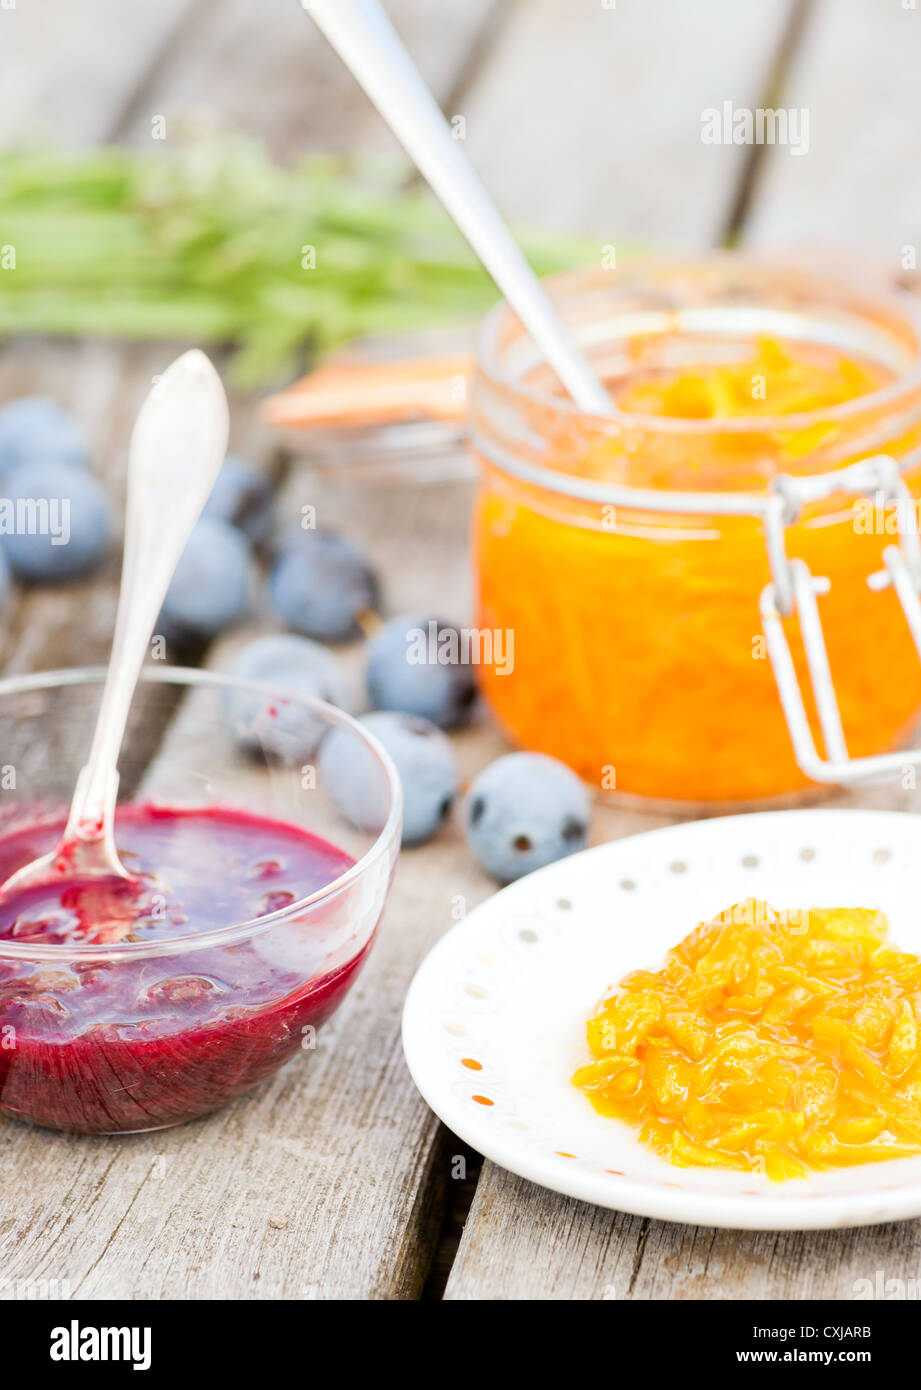 Organic marmalade from bullace plums and carrot marmalade Stock Photo